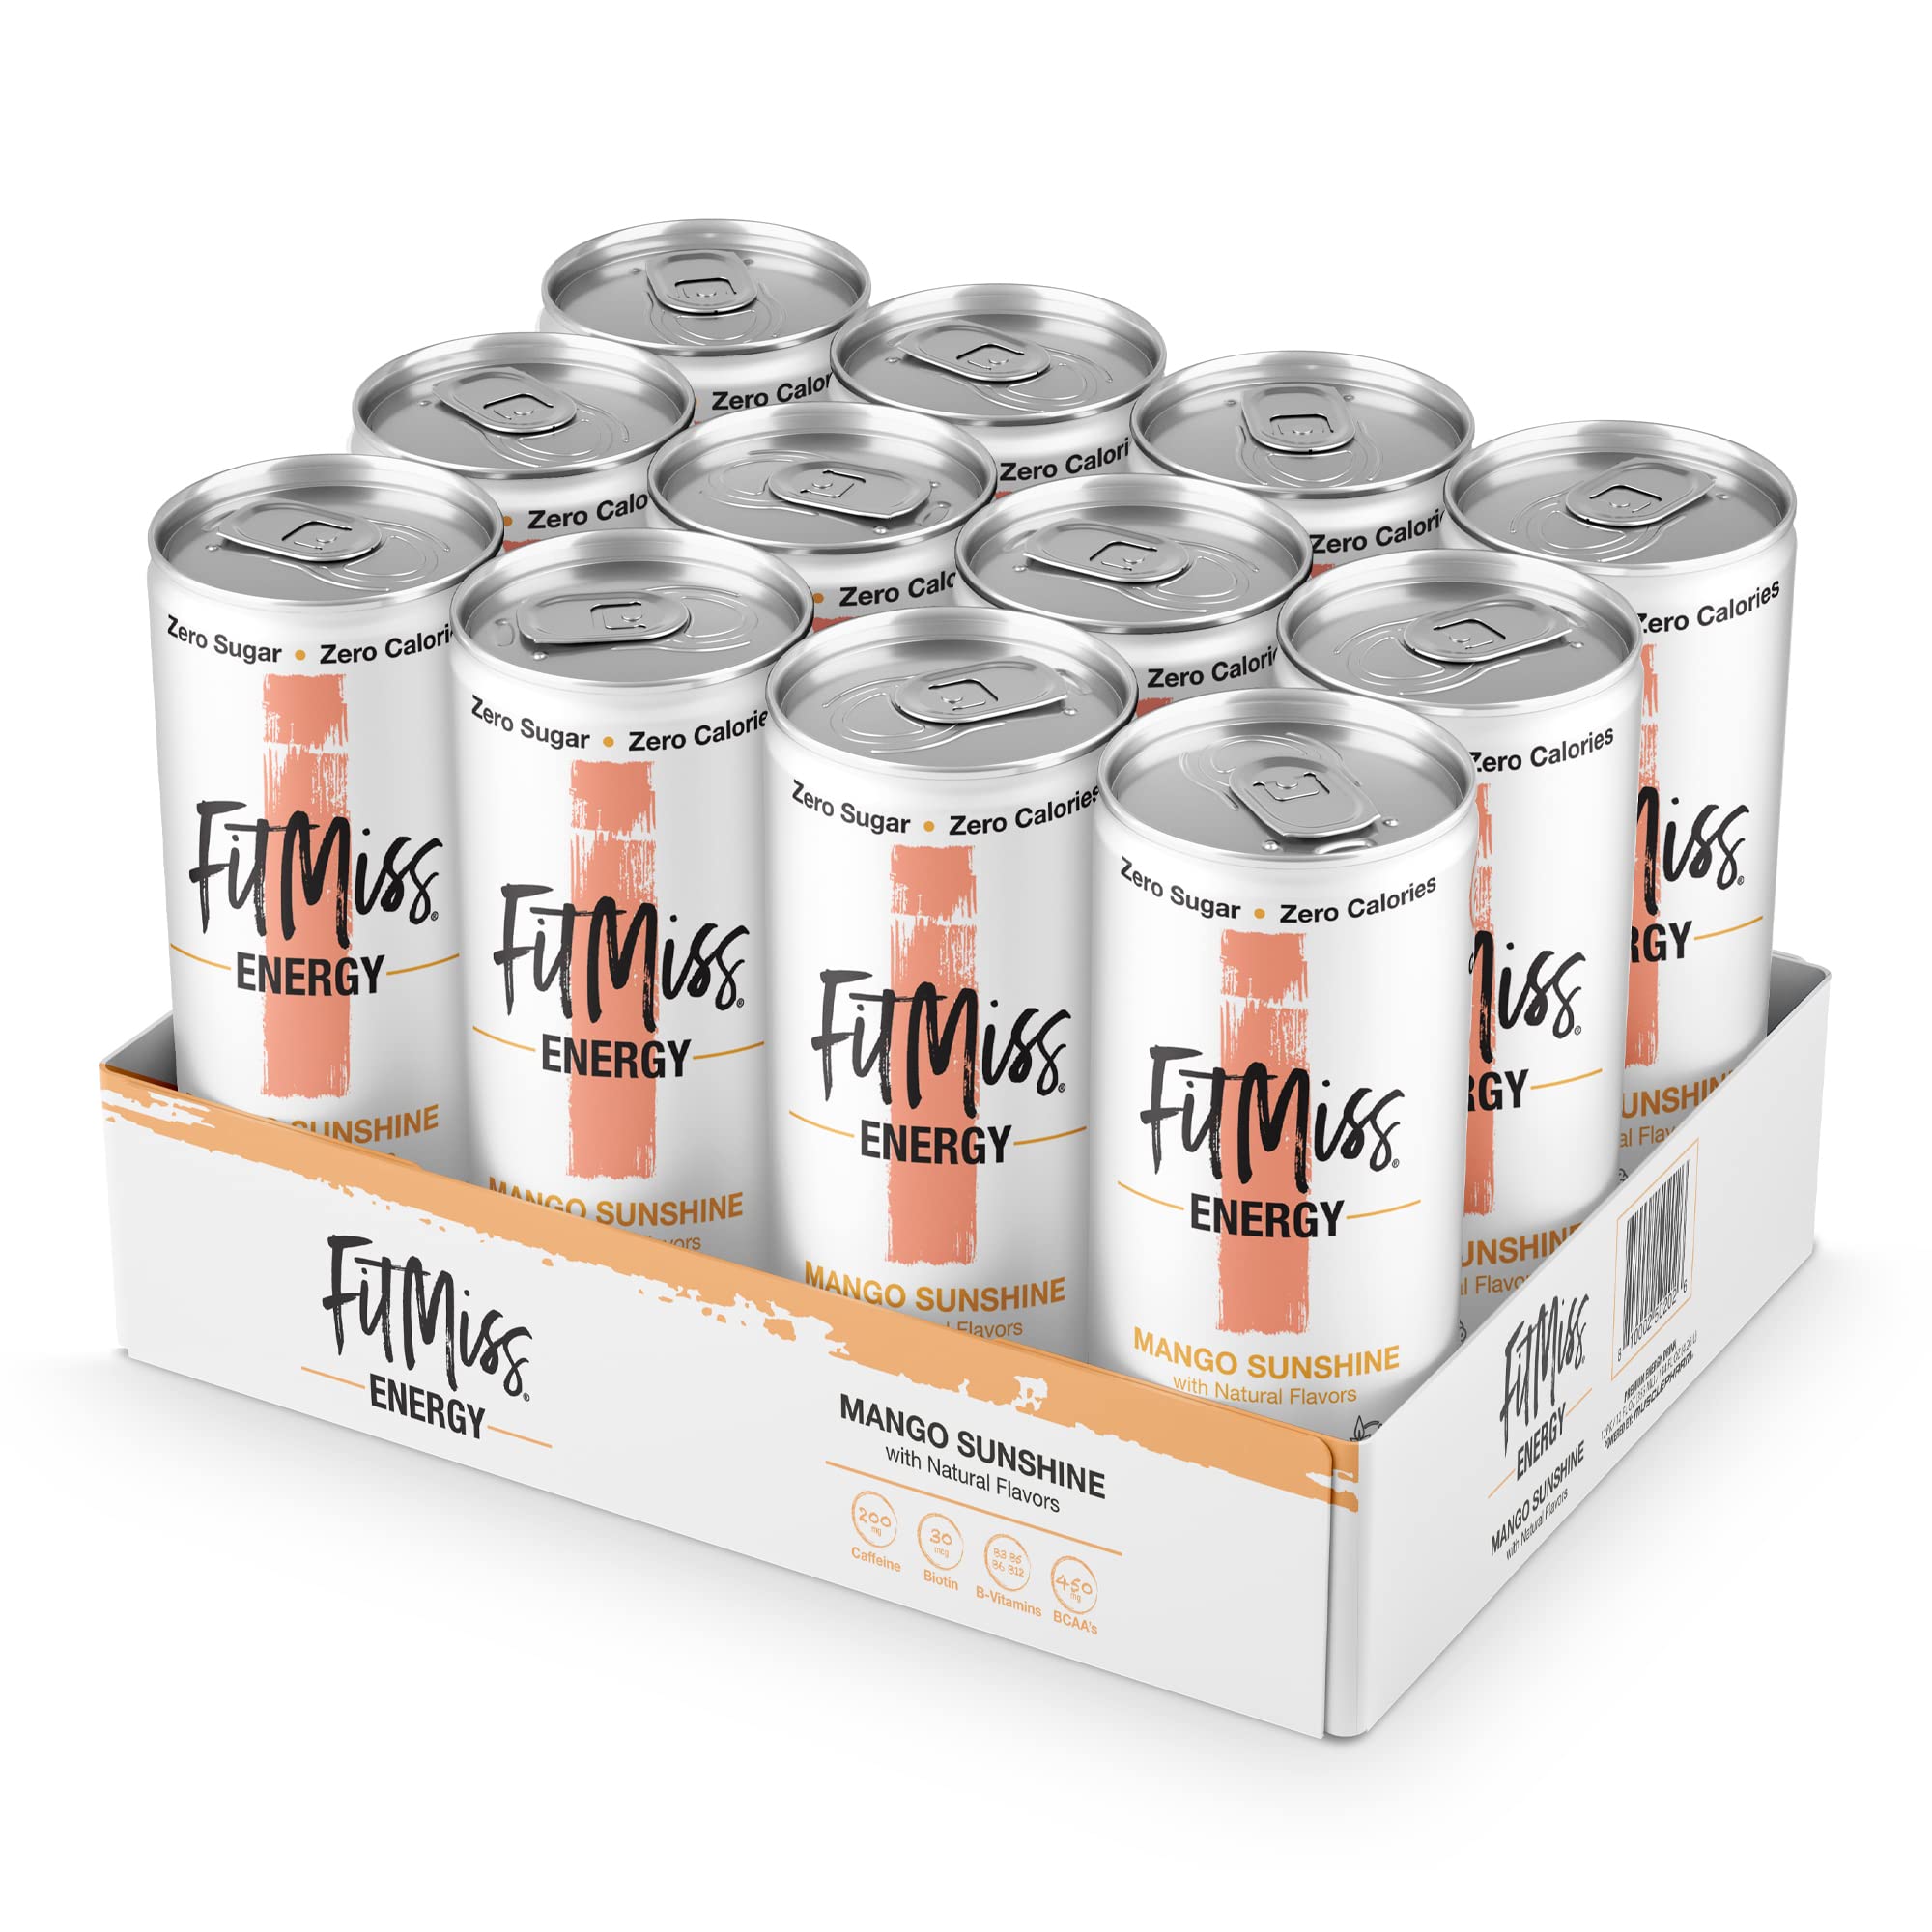 12-Pack 12-Oz MusclePharm FitMiss Sugar Free Energy Drink (Mango) $8.87 + Free Shipping w/ Prime or on orders over $35